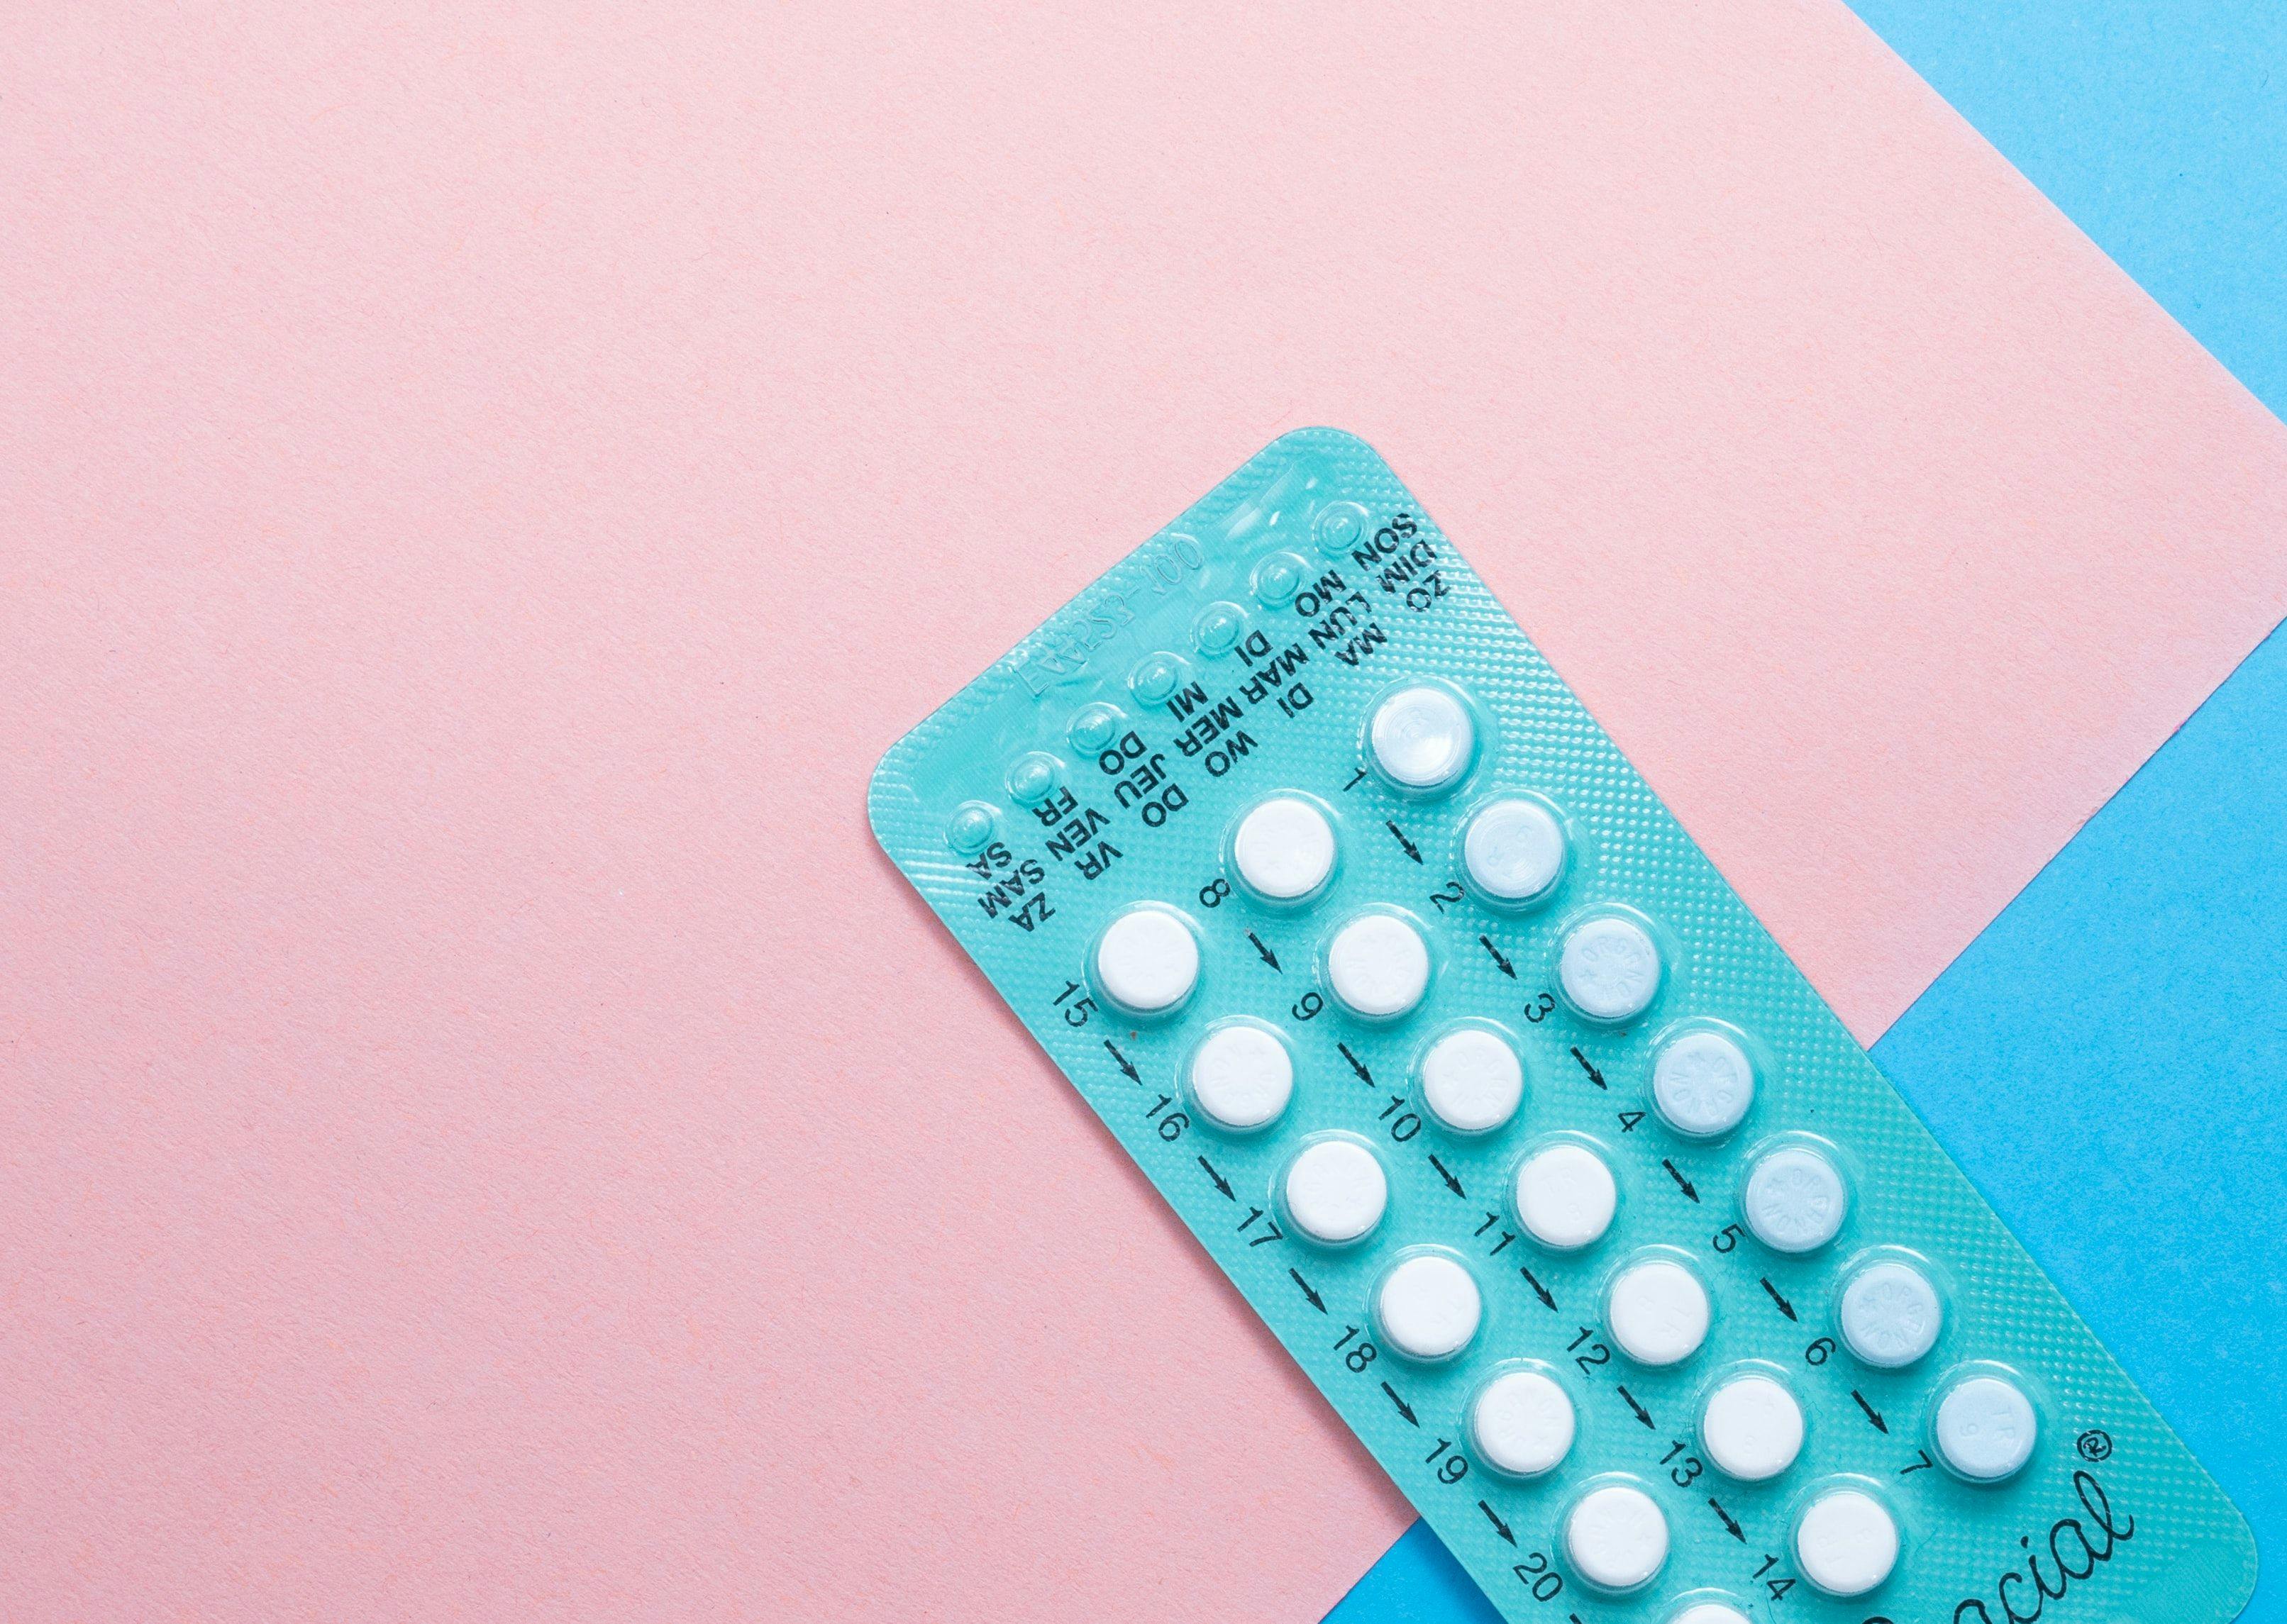 Oral Contraceptives May Reduce Risk of Ovarian Cancer in BRCA Carriers